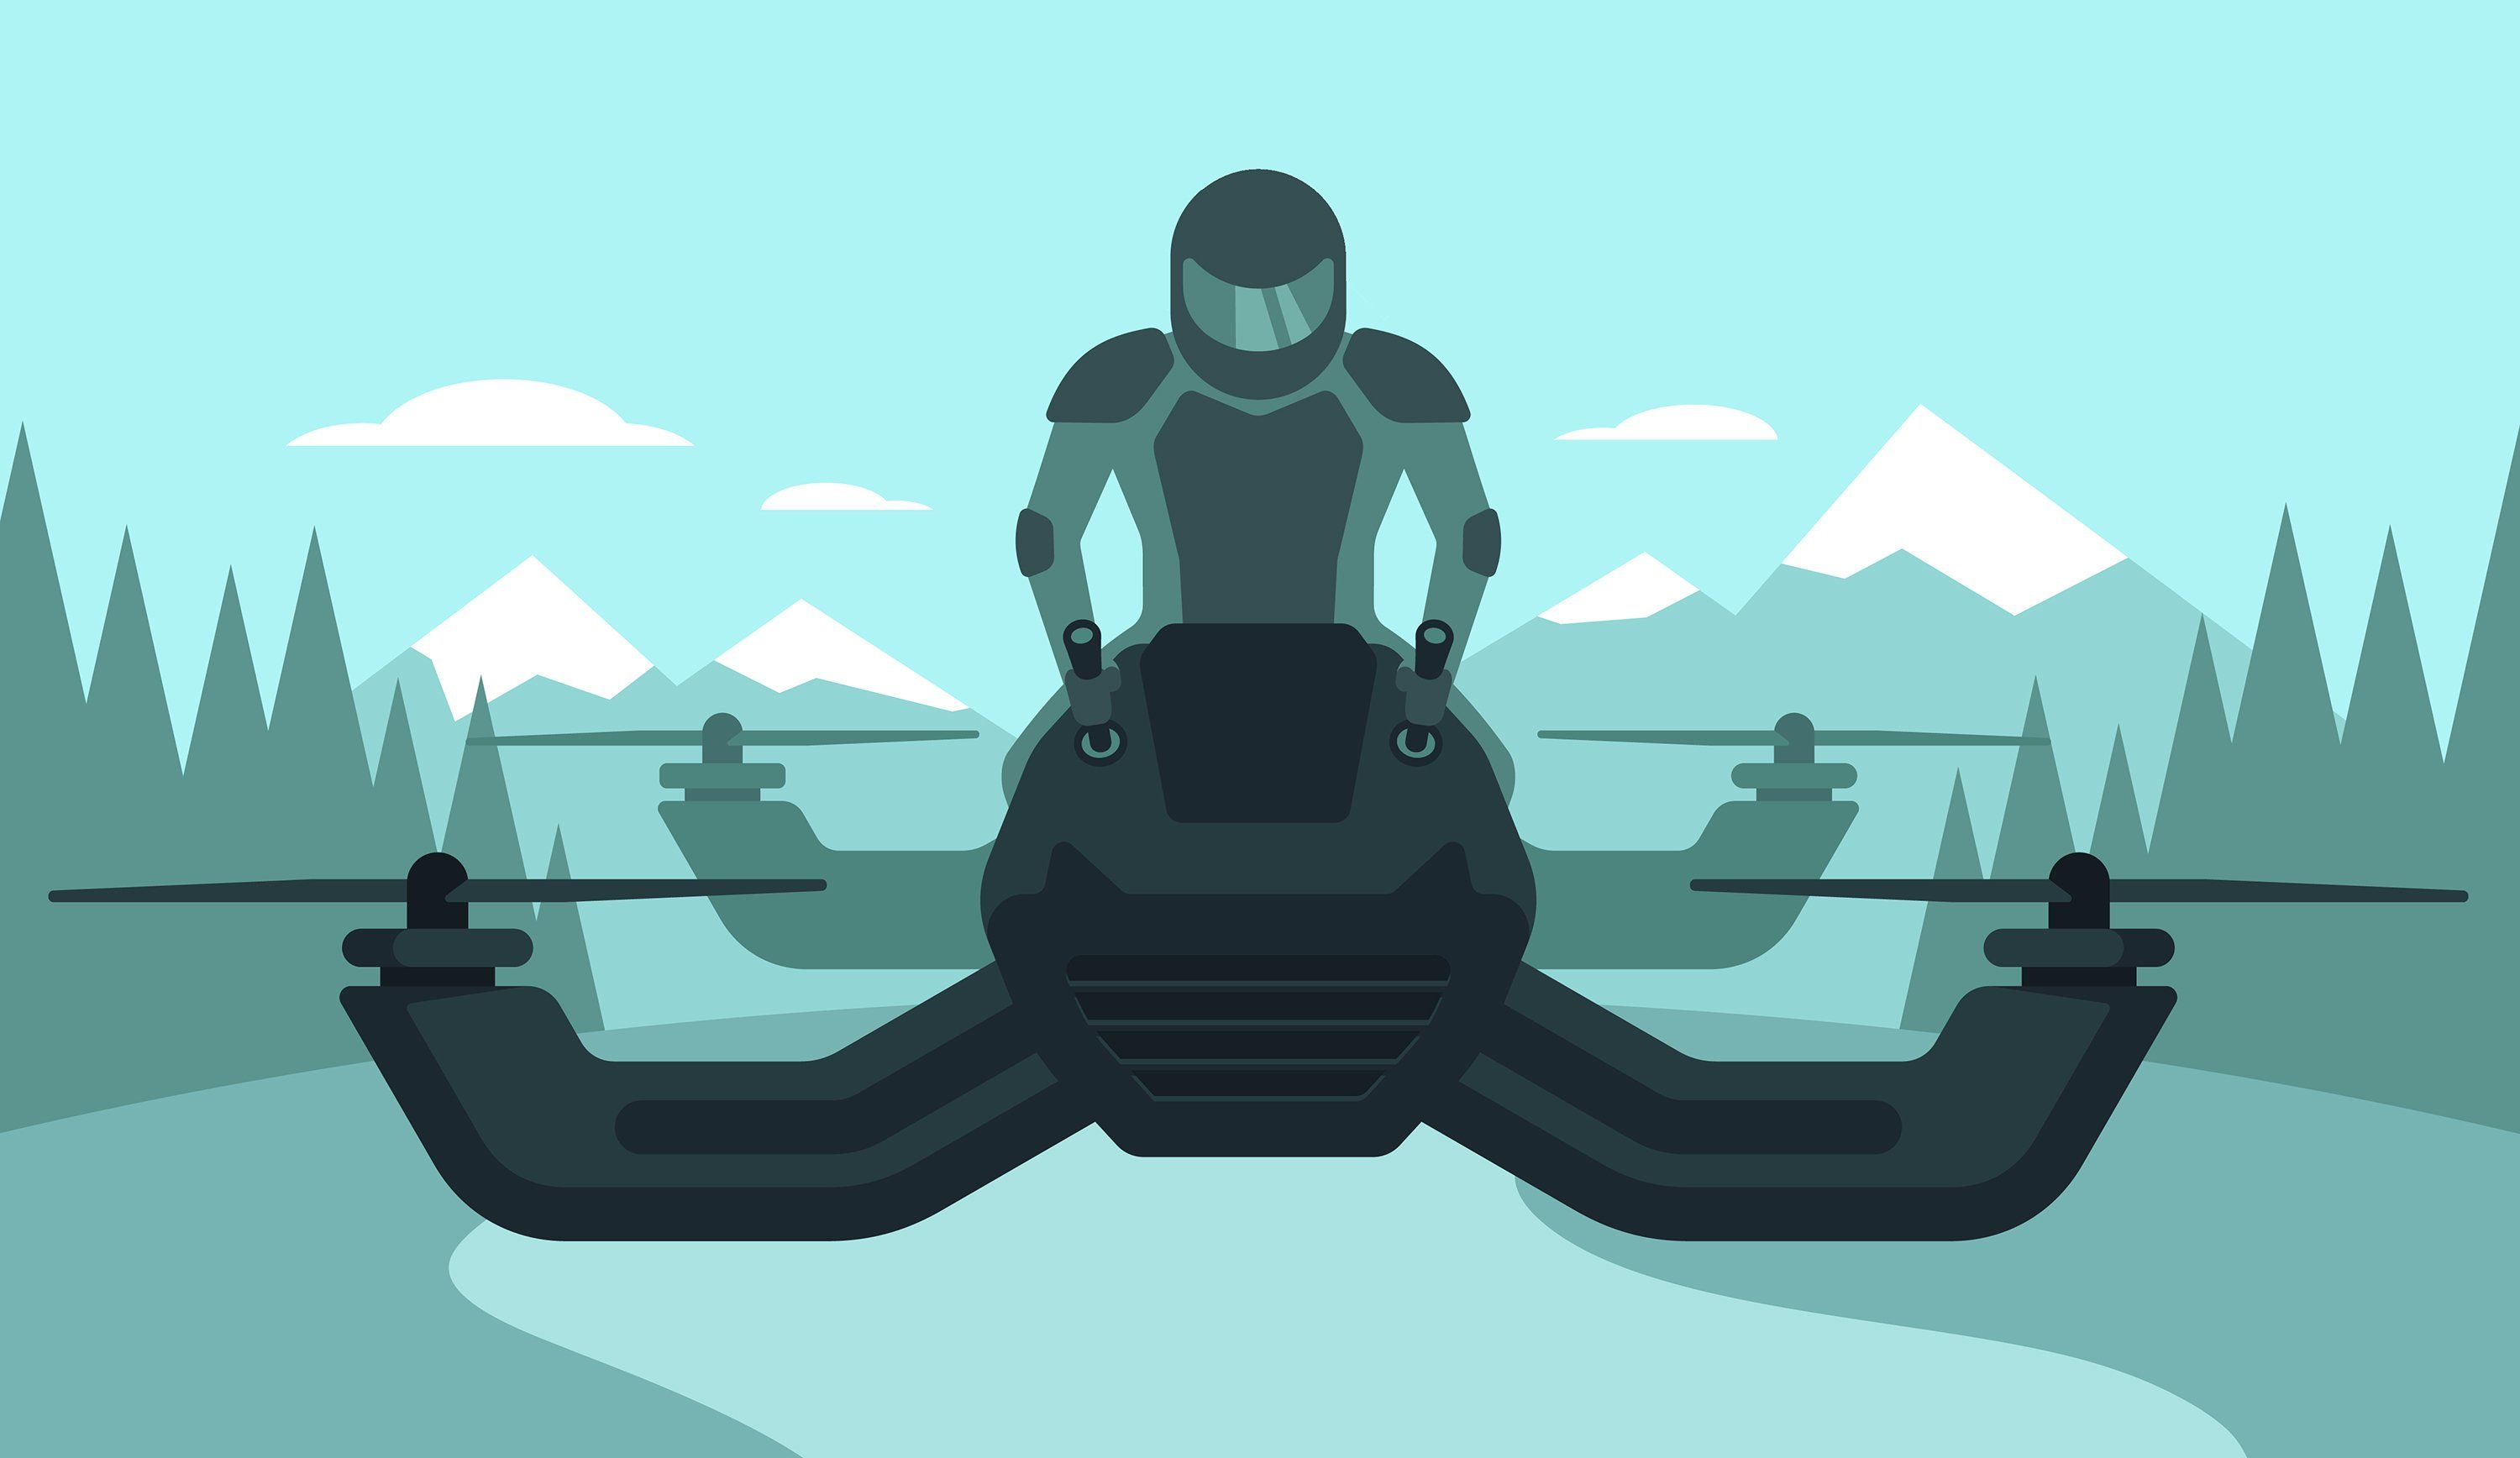 Illustration of a helmeted person on a hovercraft with four rotors